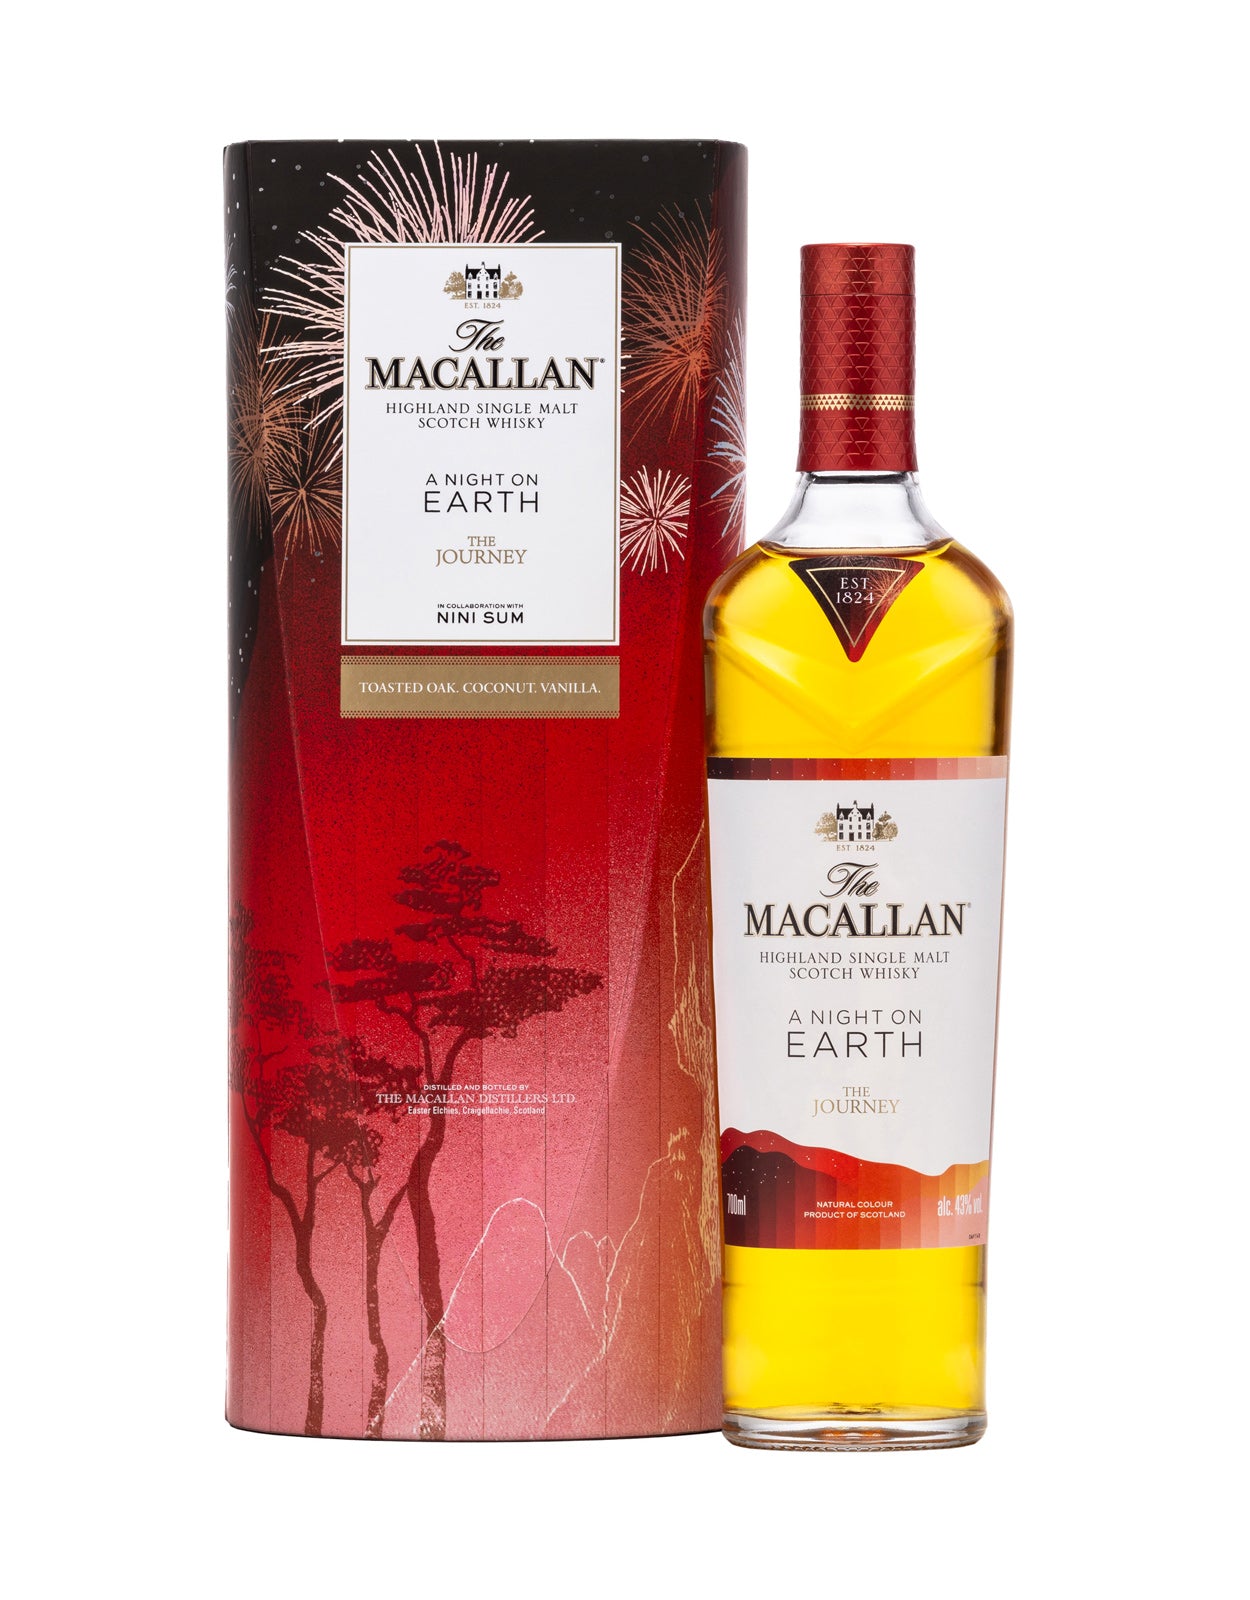 The Macallan A Night on Earth 'The Journey' - Nini Sum Artist Collection